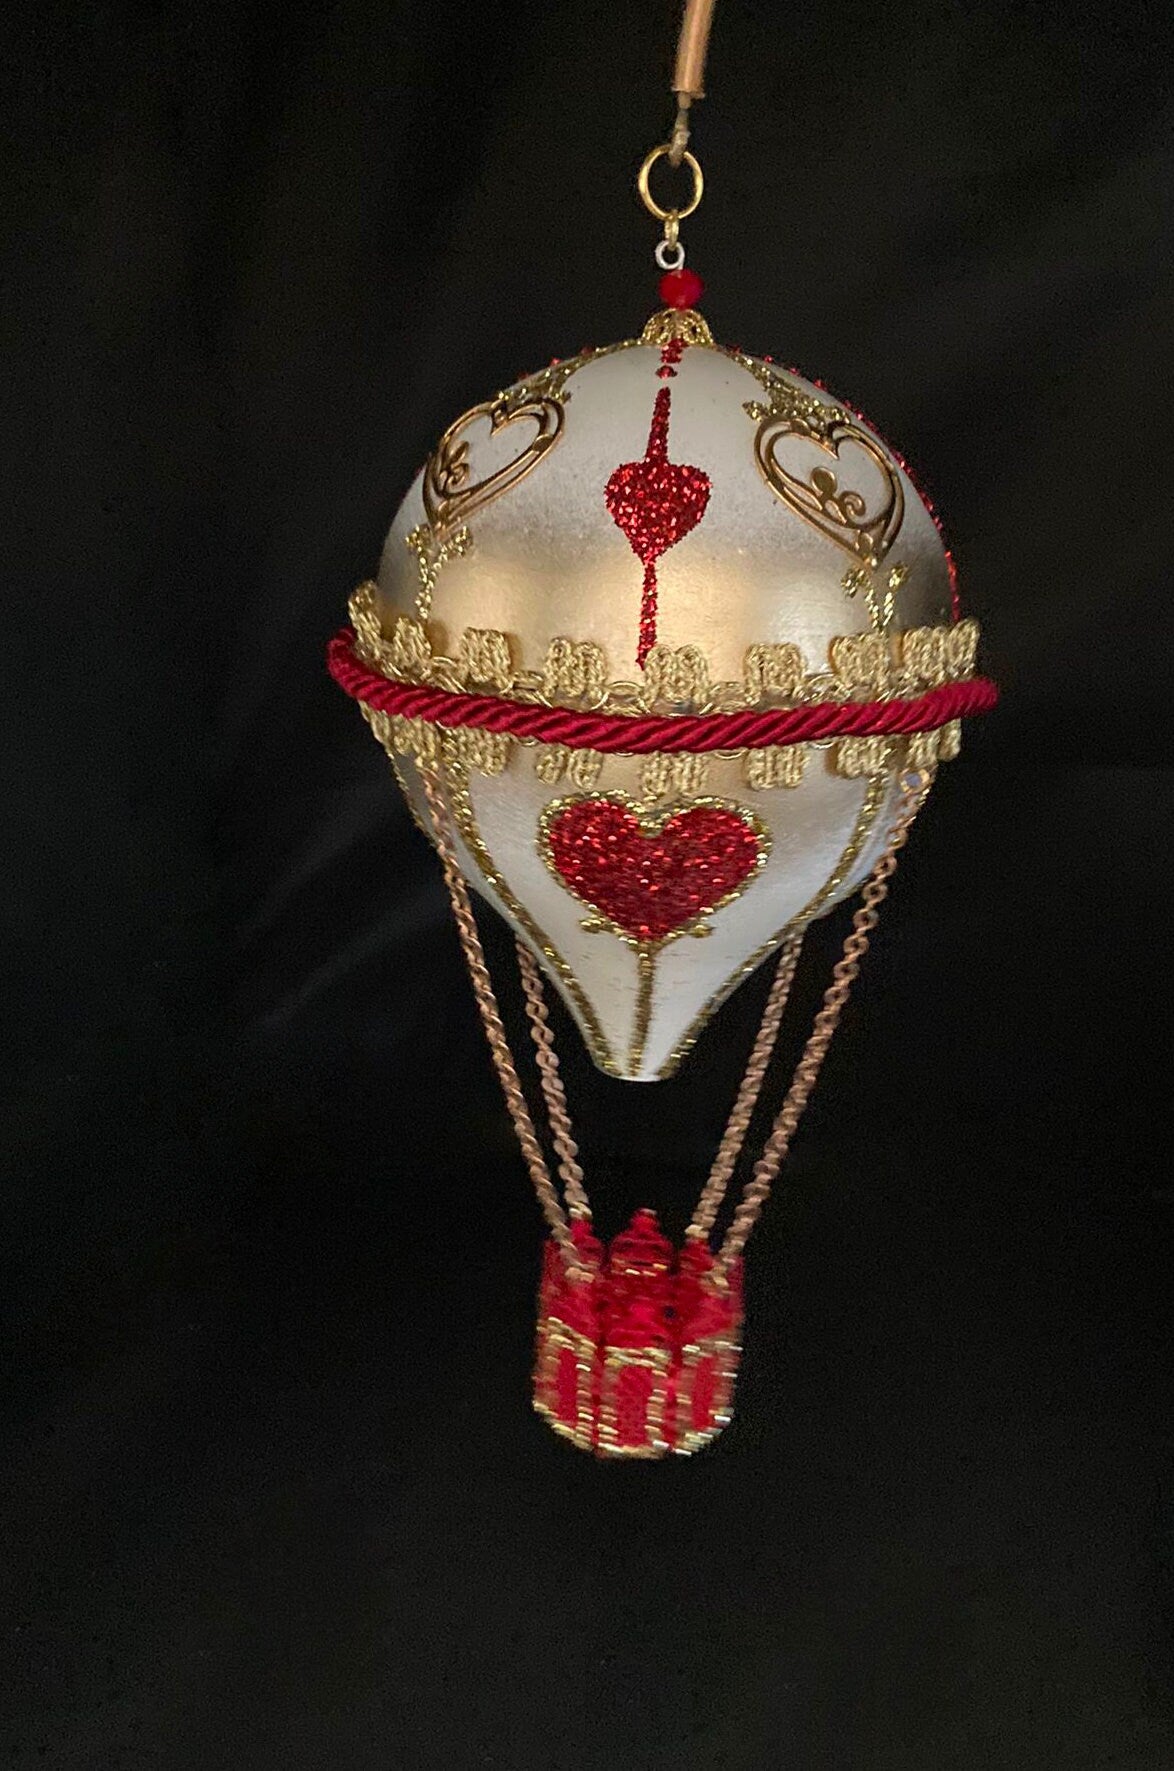 Hot air balloon Hand made in Italy in Paper Mache, Gold Leaf For decorations - Home Decor